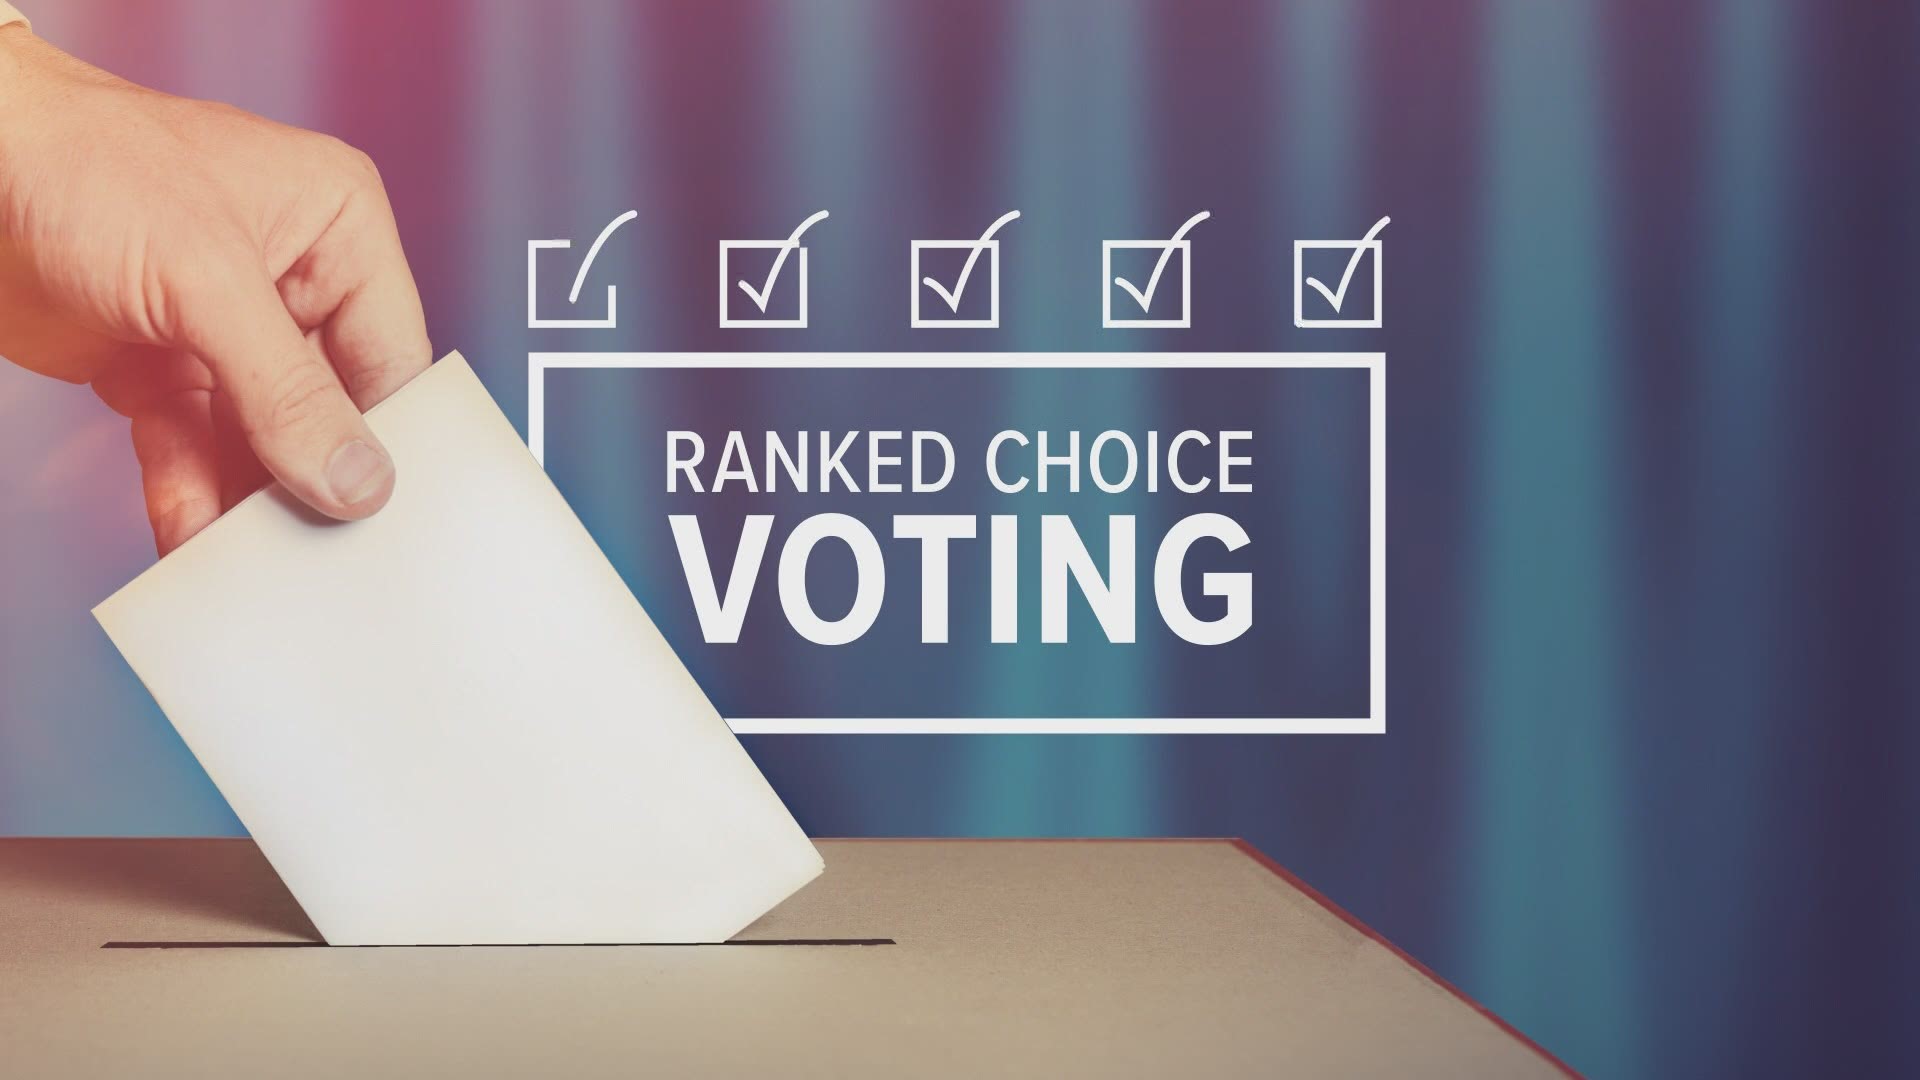 Come November, Maine will become the first state in U.S. history to use ranked-choice voting in a presidential election.